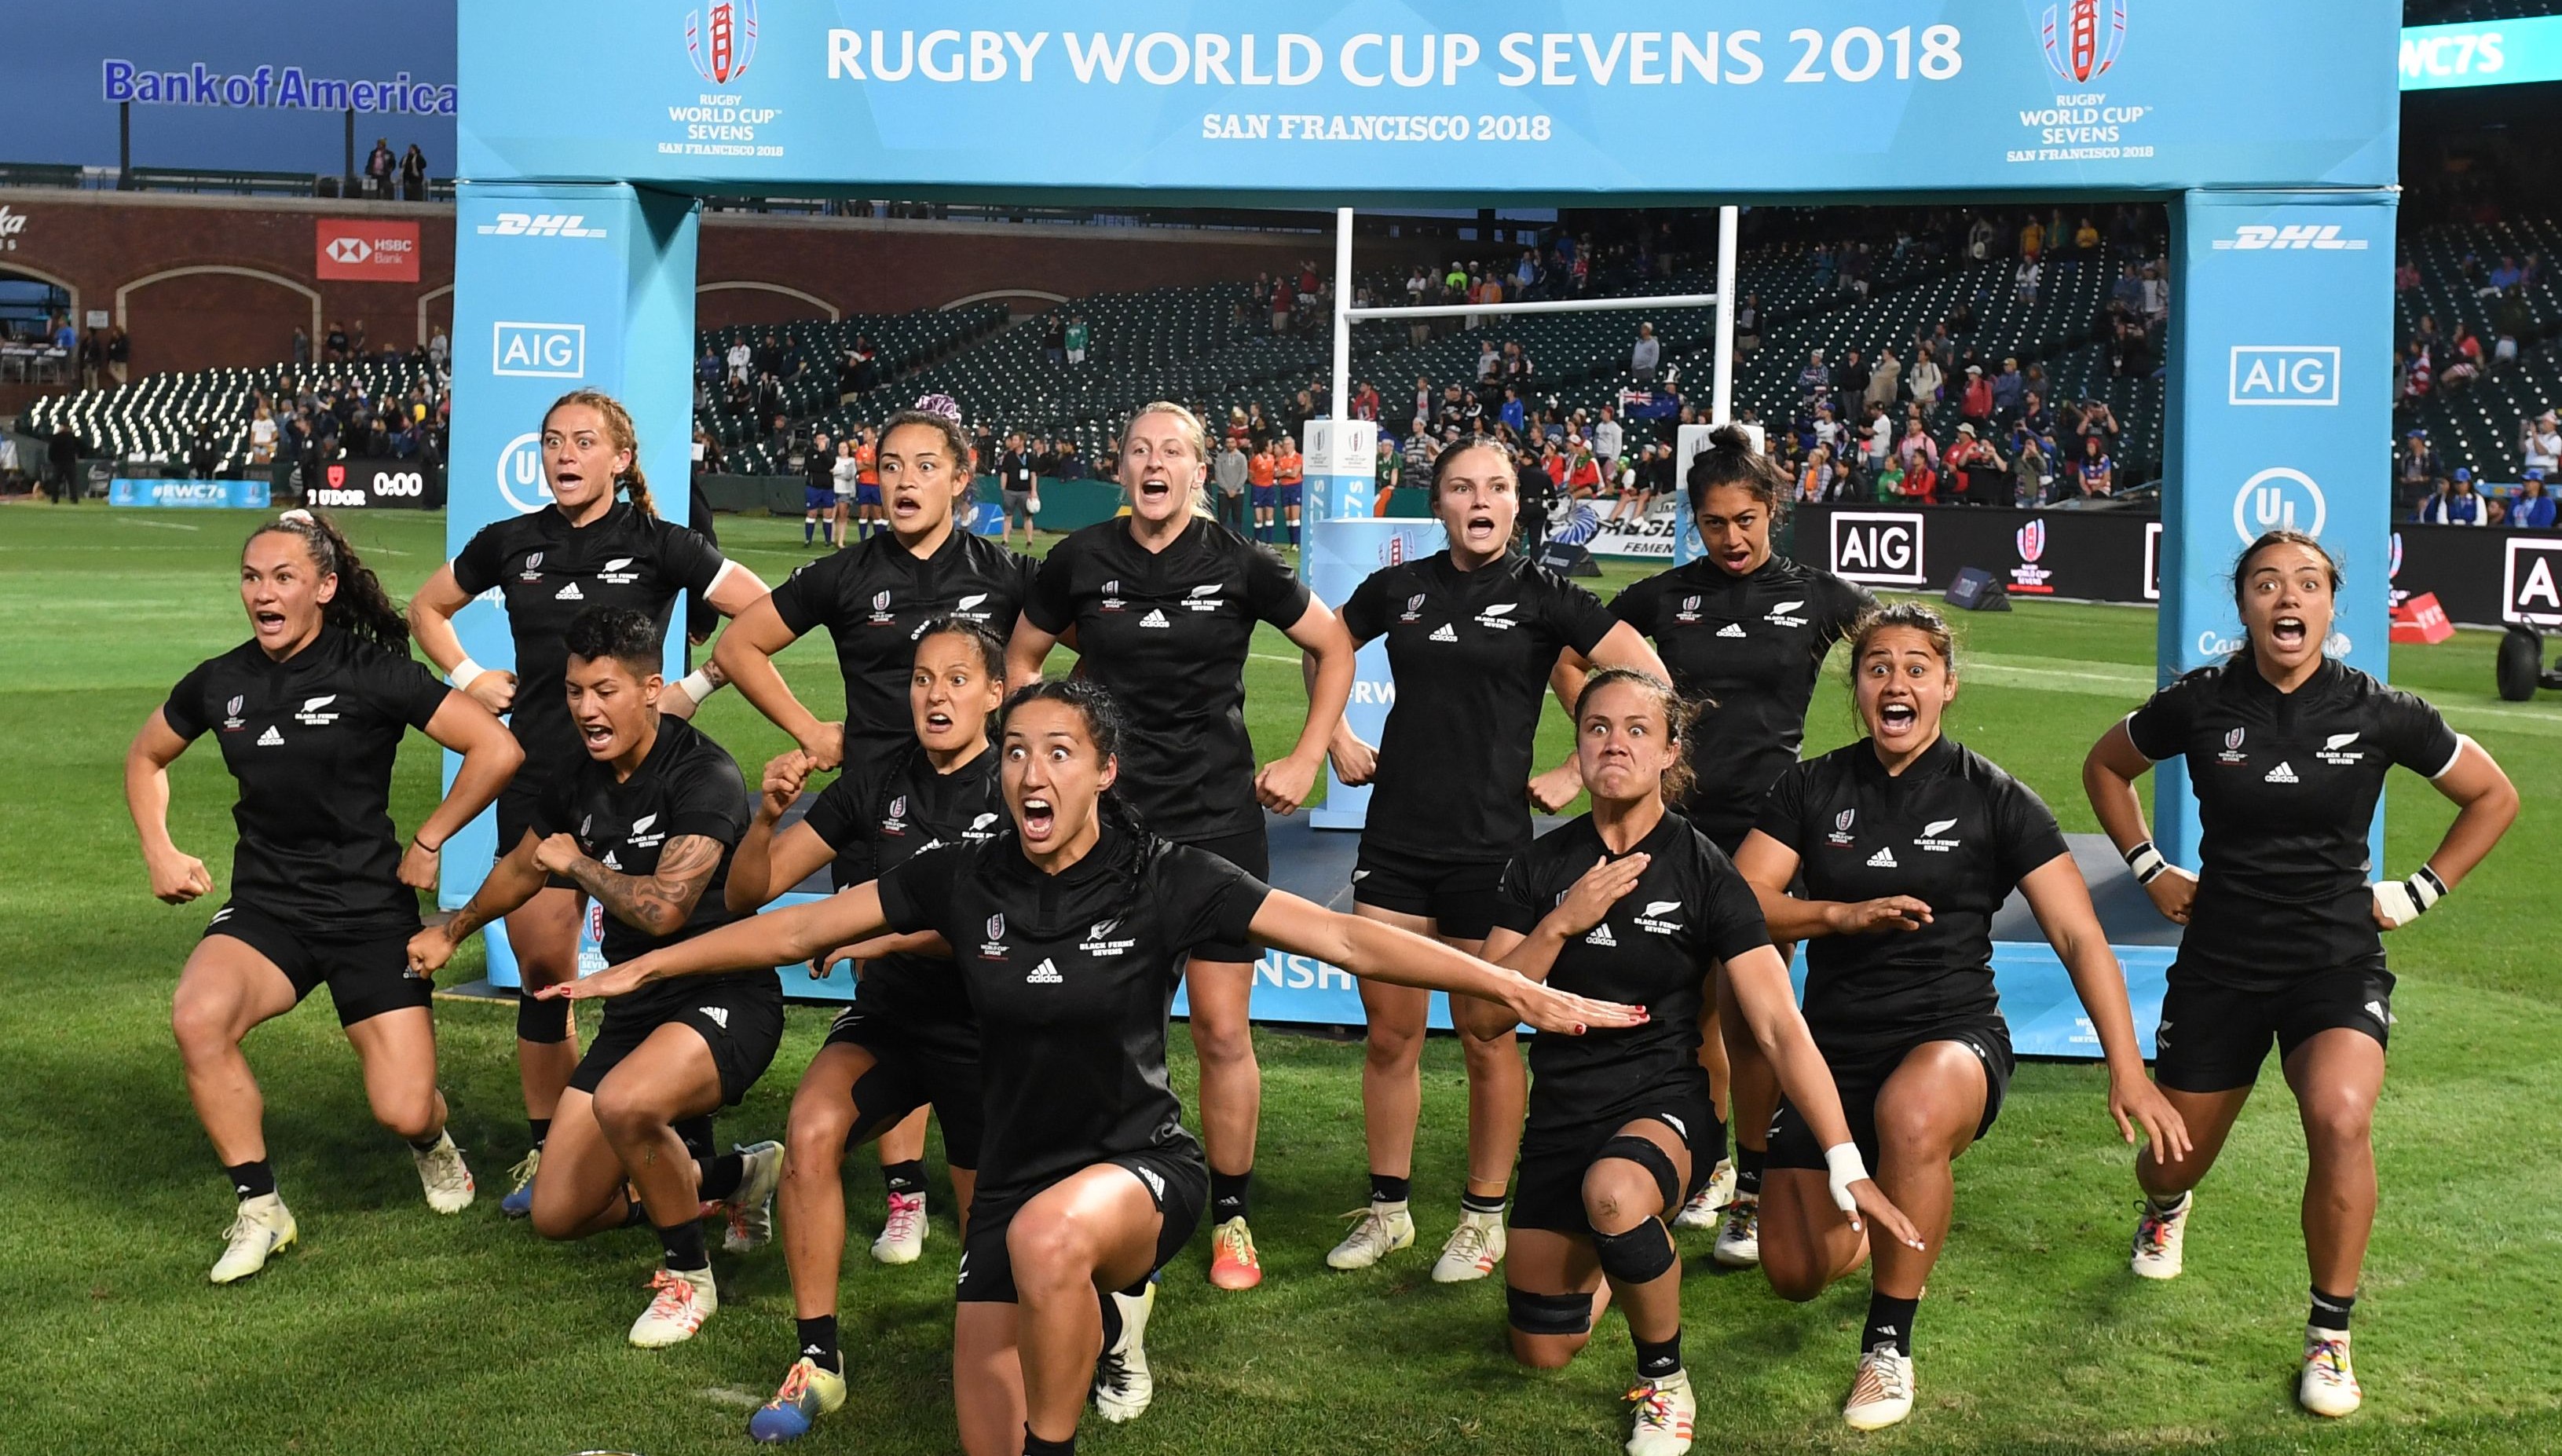 New Zealand Black Ferns crowned Rugby World Cup Sevens champions